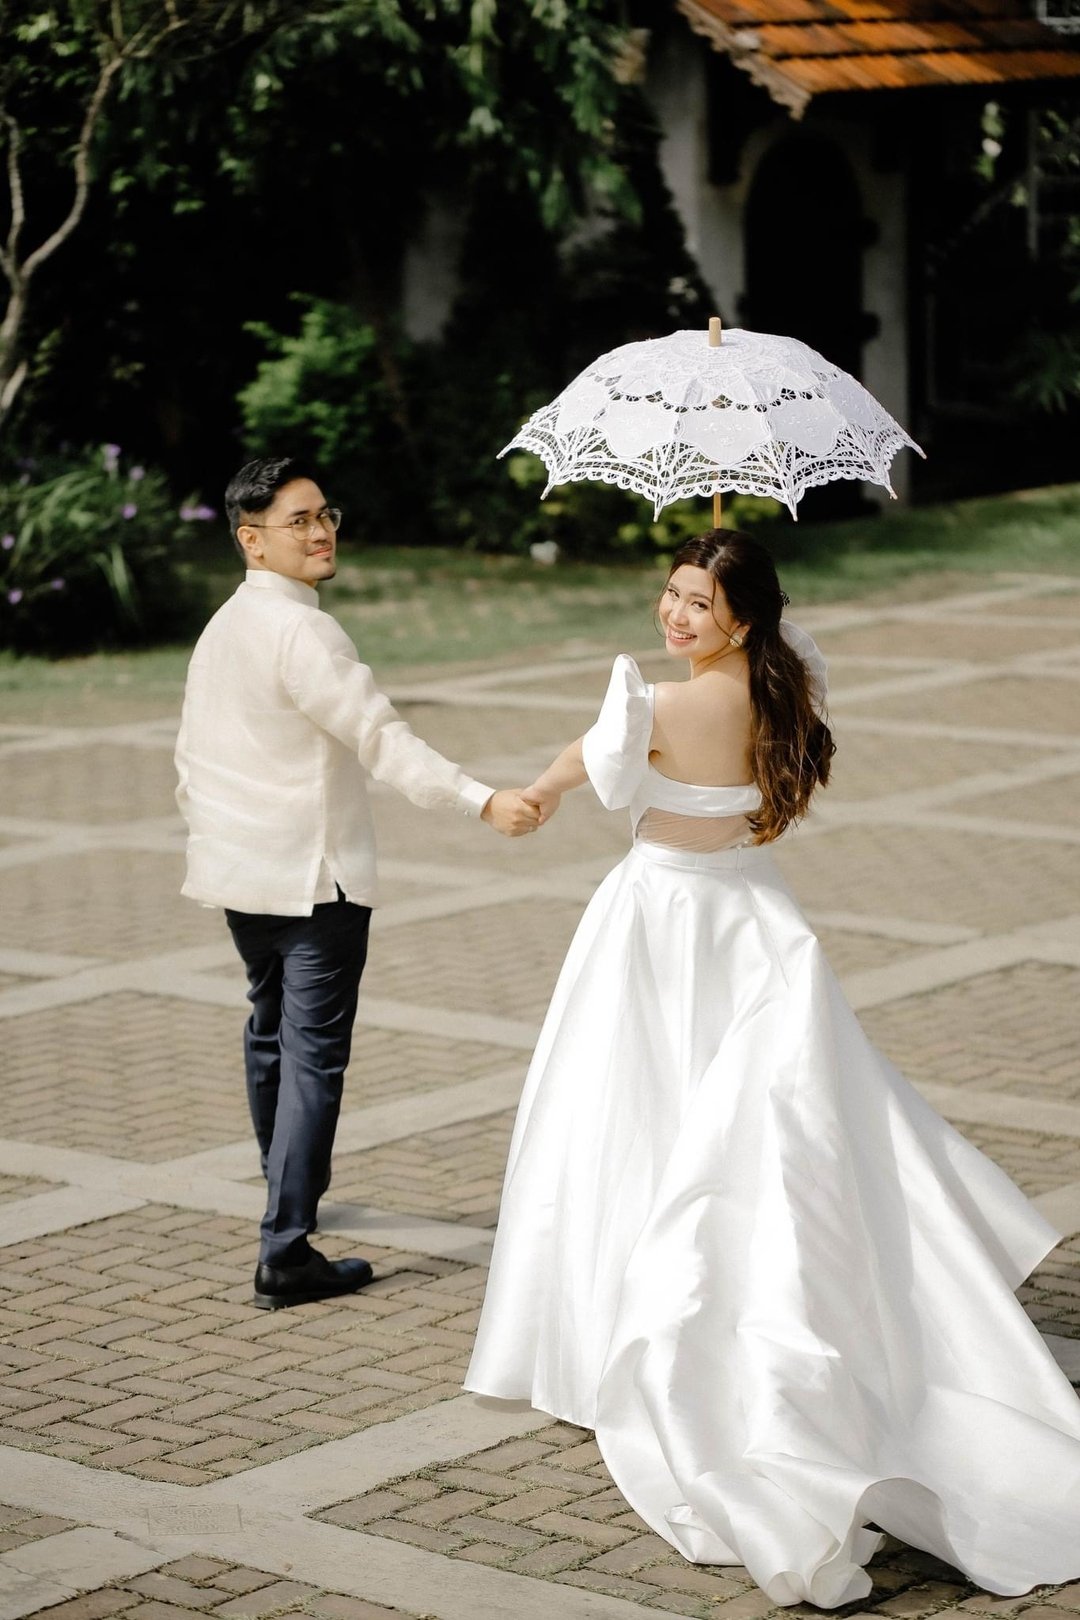 &ldquo;I prayed to God that if He will give someone to me, he is someone who has faith and who would love me as what should love is, and you came.&rdquo; - Vianca

BRIDAL HMUA | @joanquiz0n
PHOTO | @teambenitezphoto
VIDEO | @stellarstoryyy
GOWN | @ca